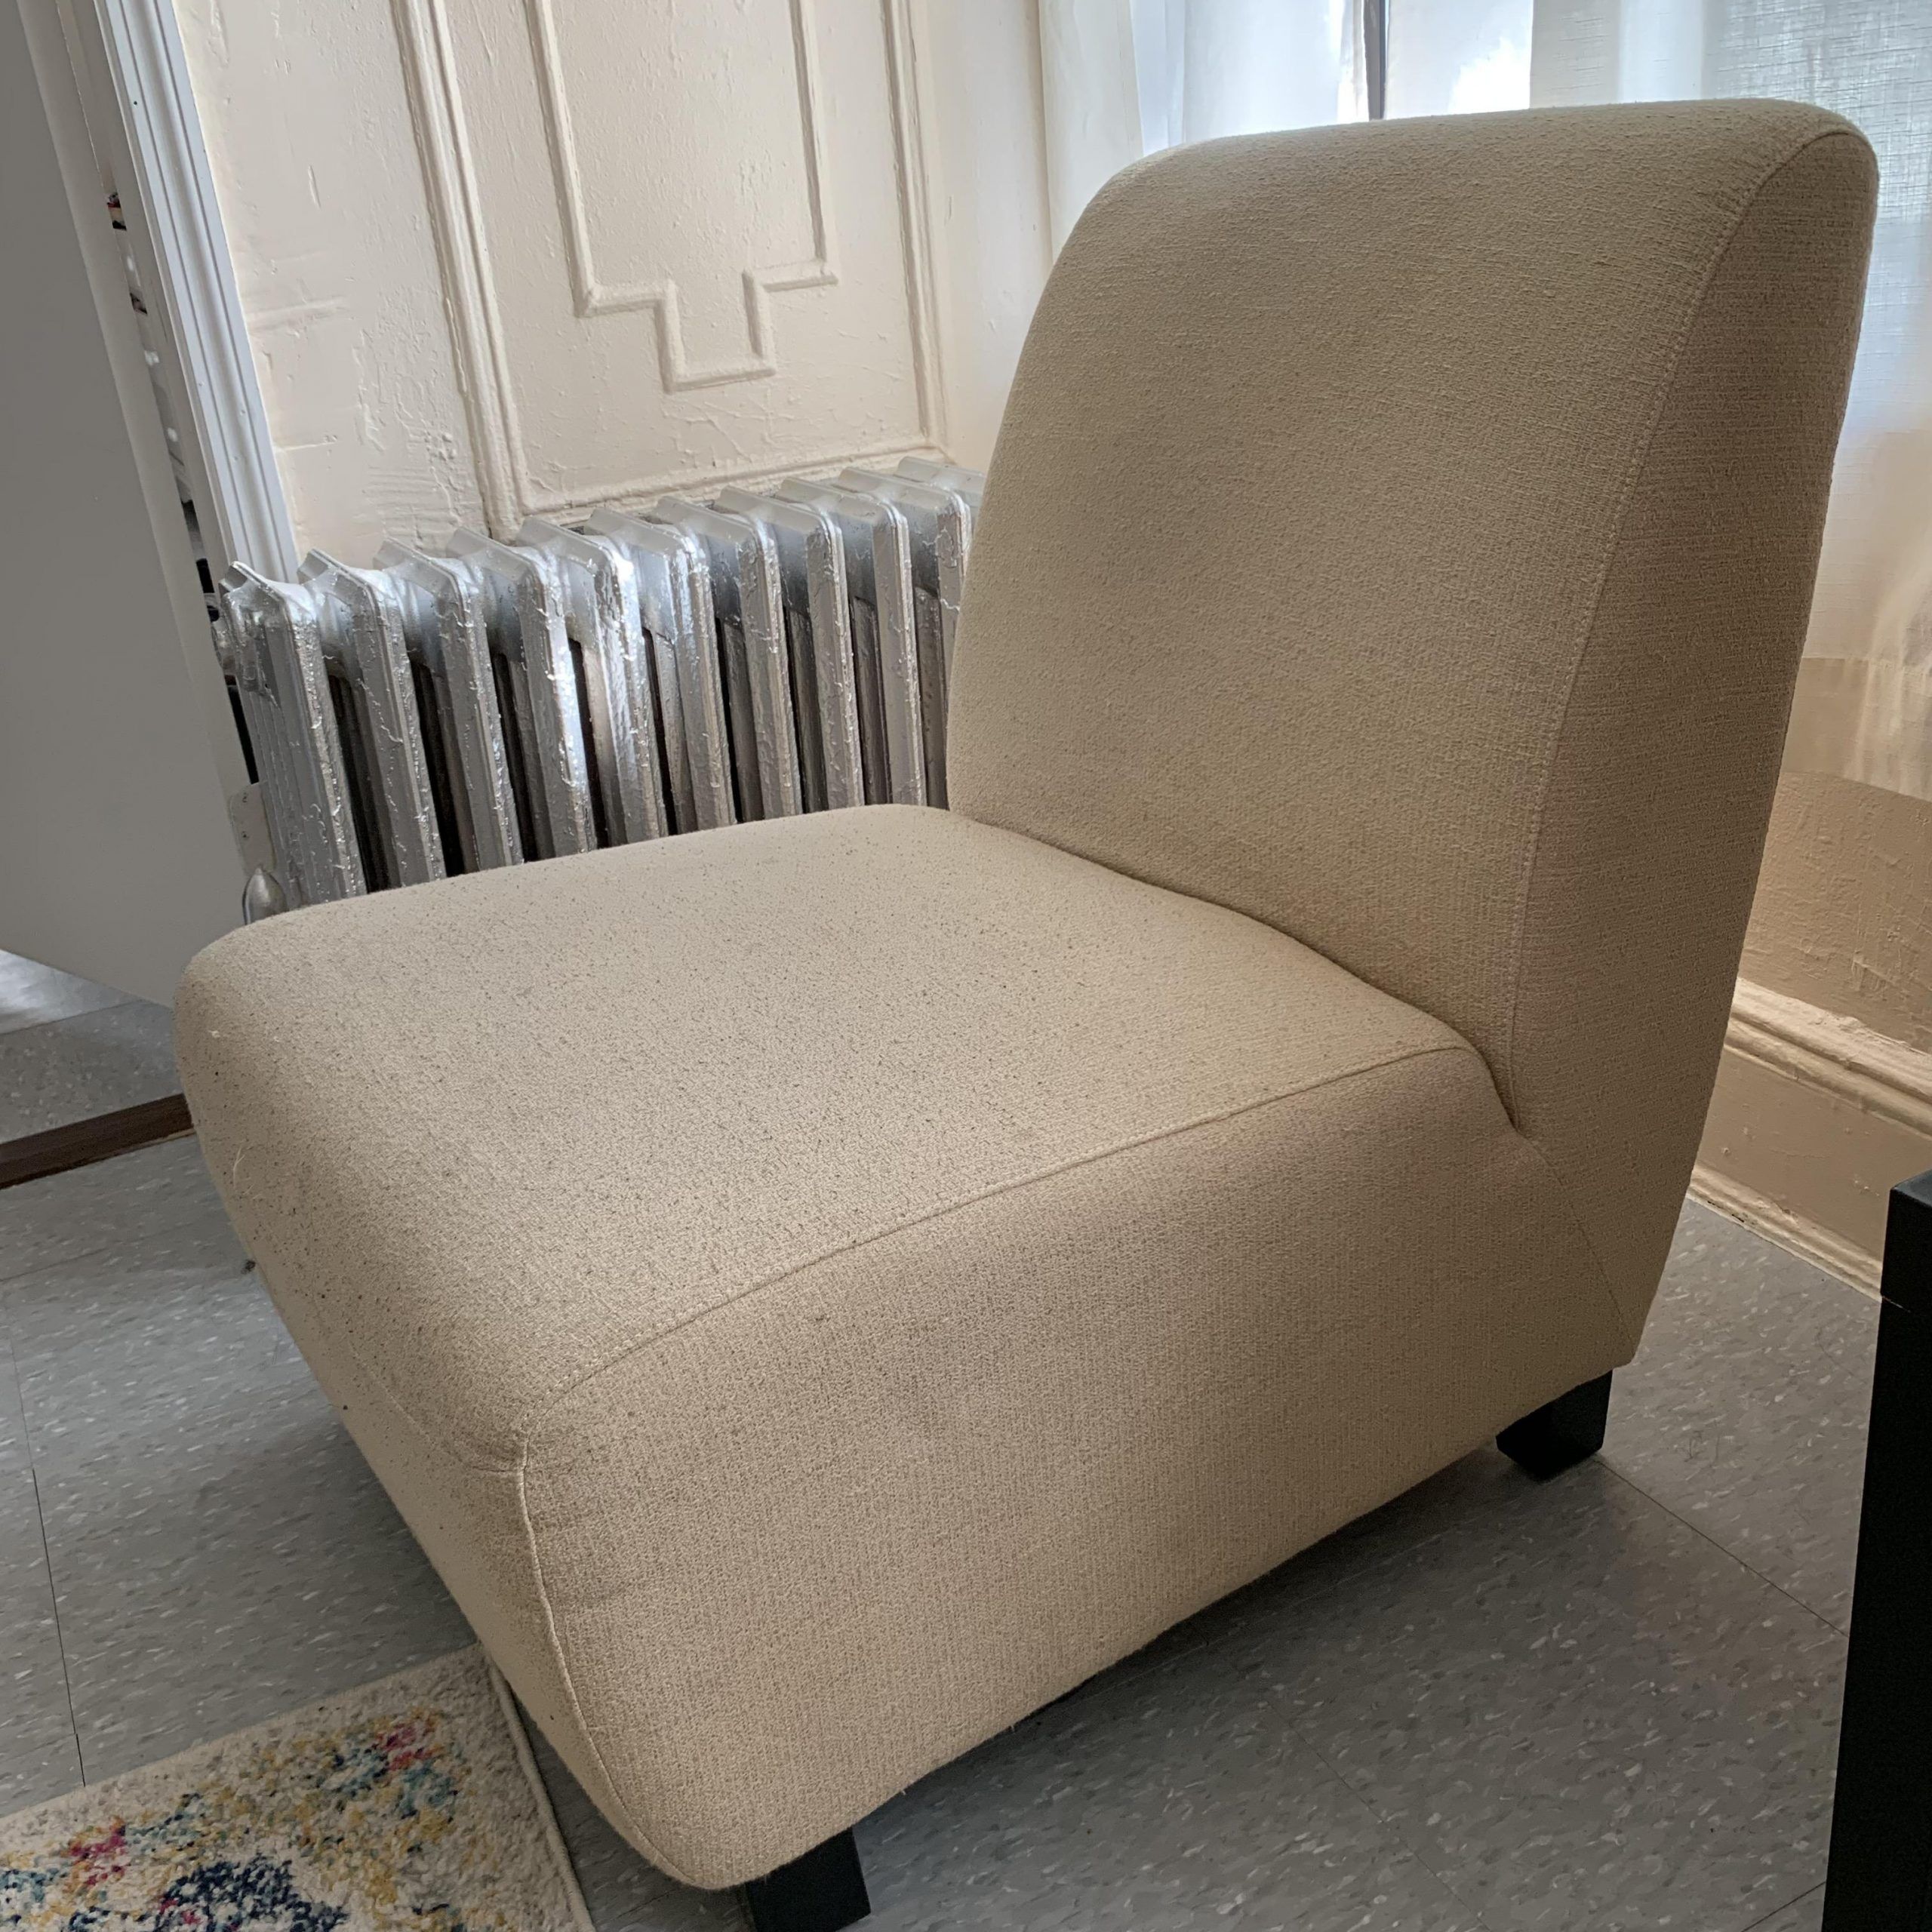 Best And Newest Wadhurst Slipper Chairs Regarding Please Help Me Find This Chair! My Roommate Got It From A (View 12 of 20)